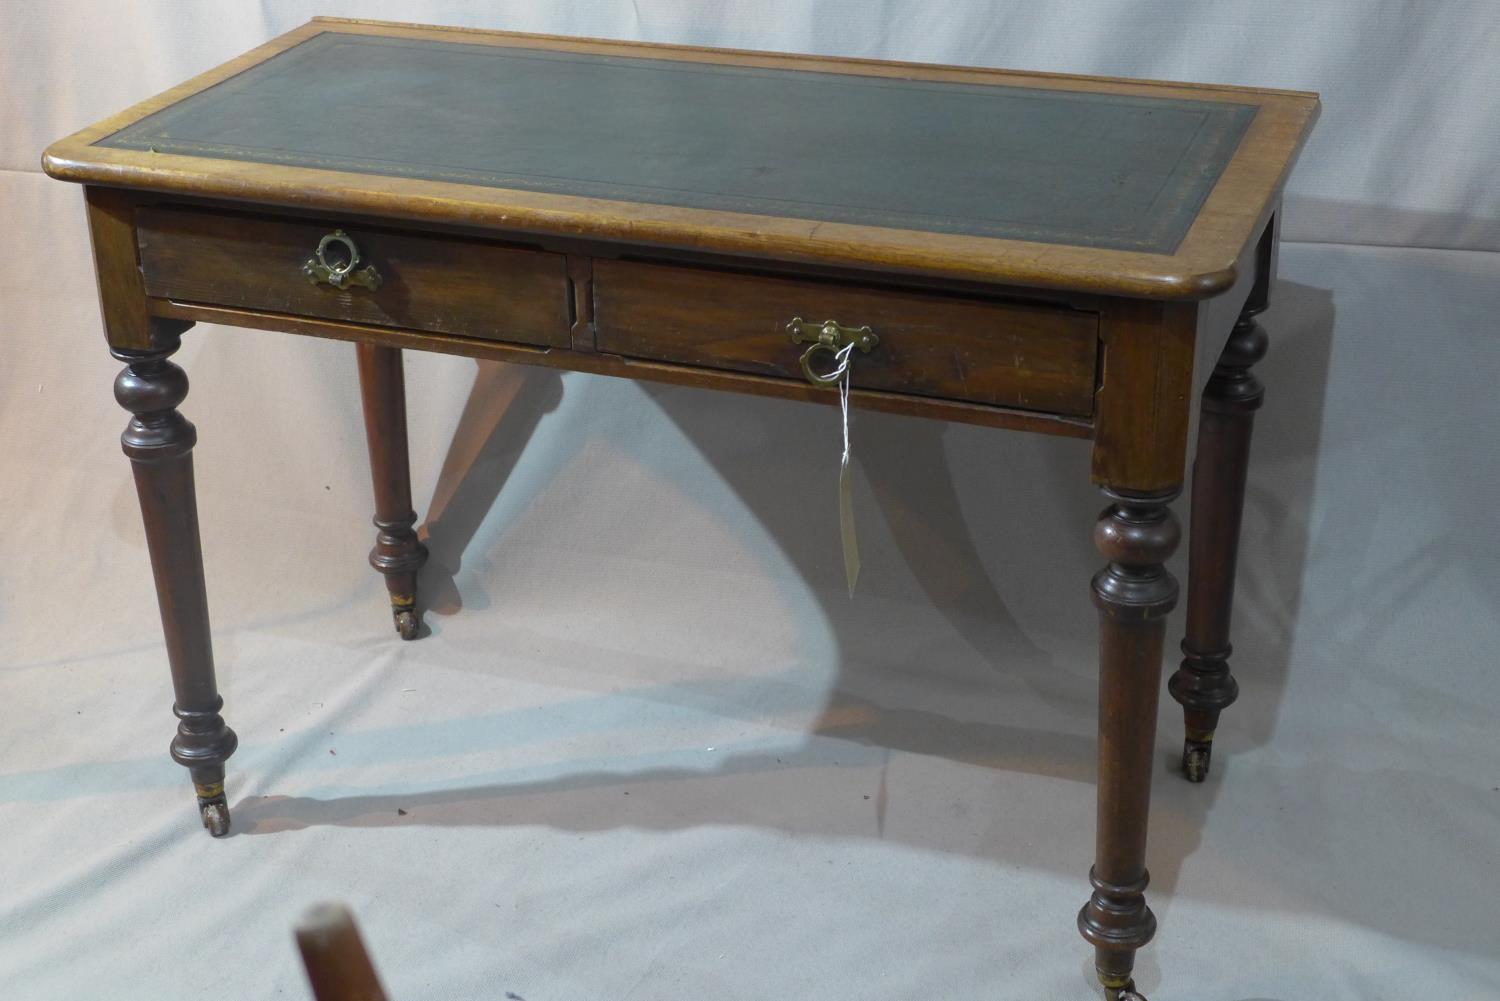 An early 20th century mahogany writing table, with two drawers, leather top, raised on turned legs